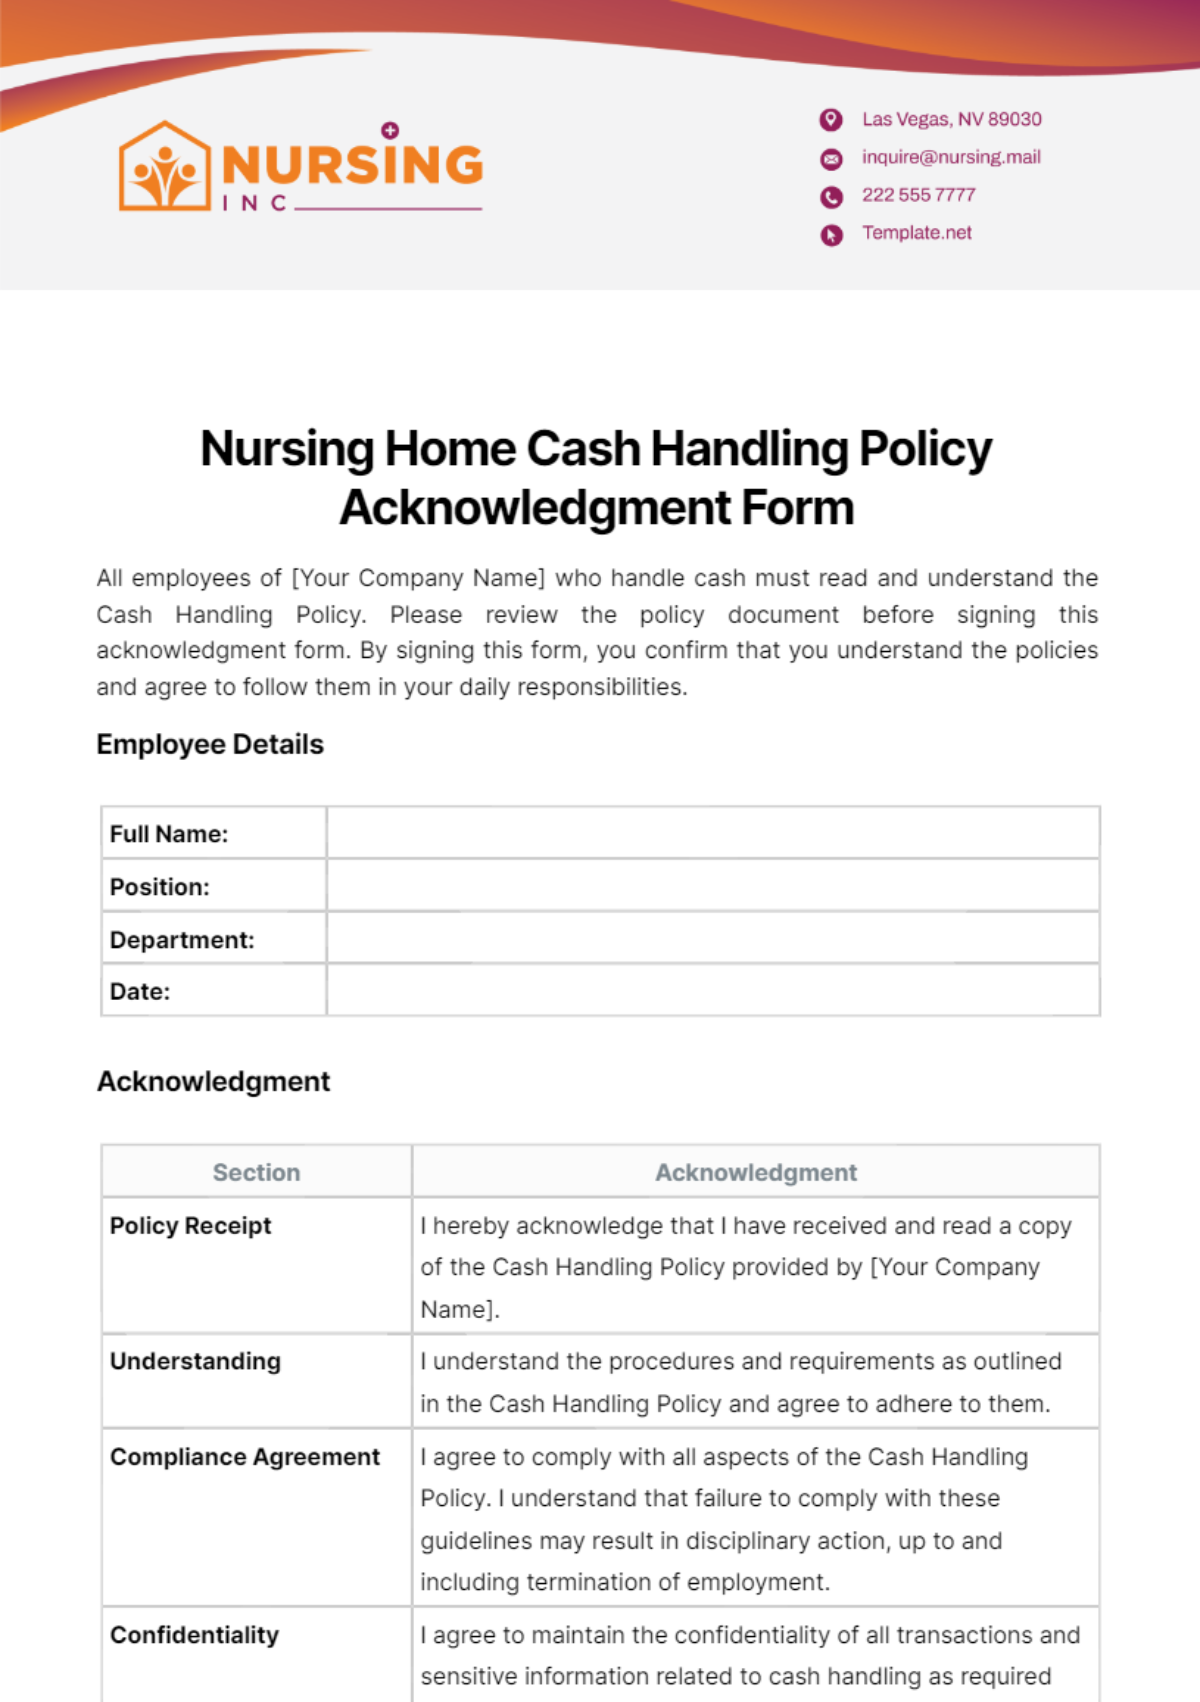 Nursing Home Cash Handling Policy Acknowledgment Form Template